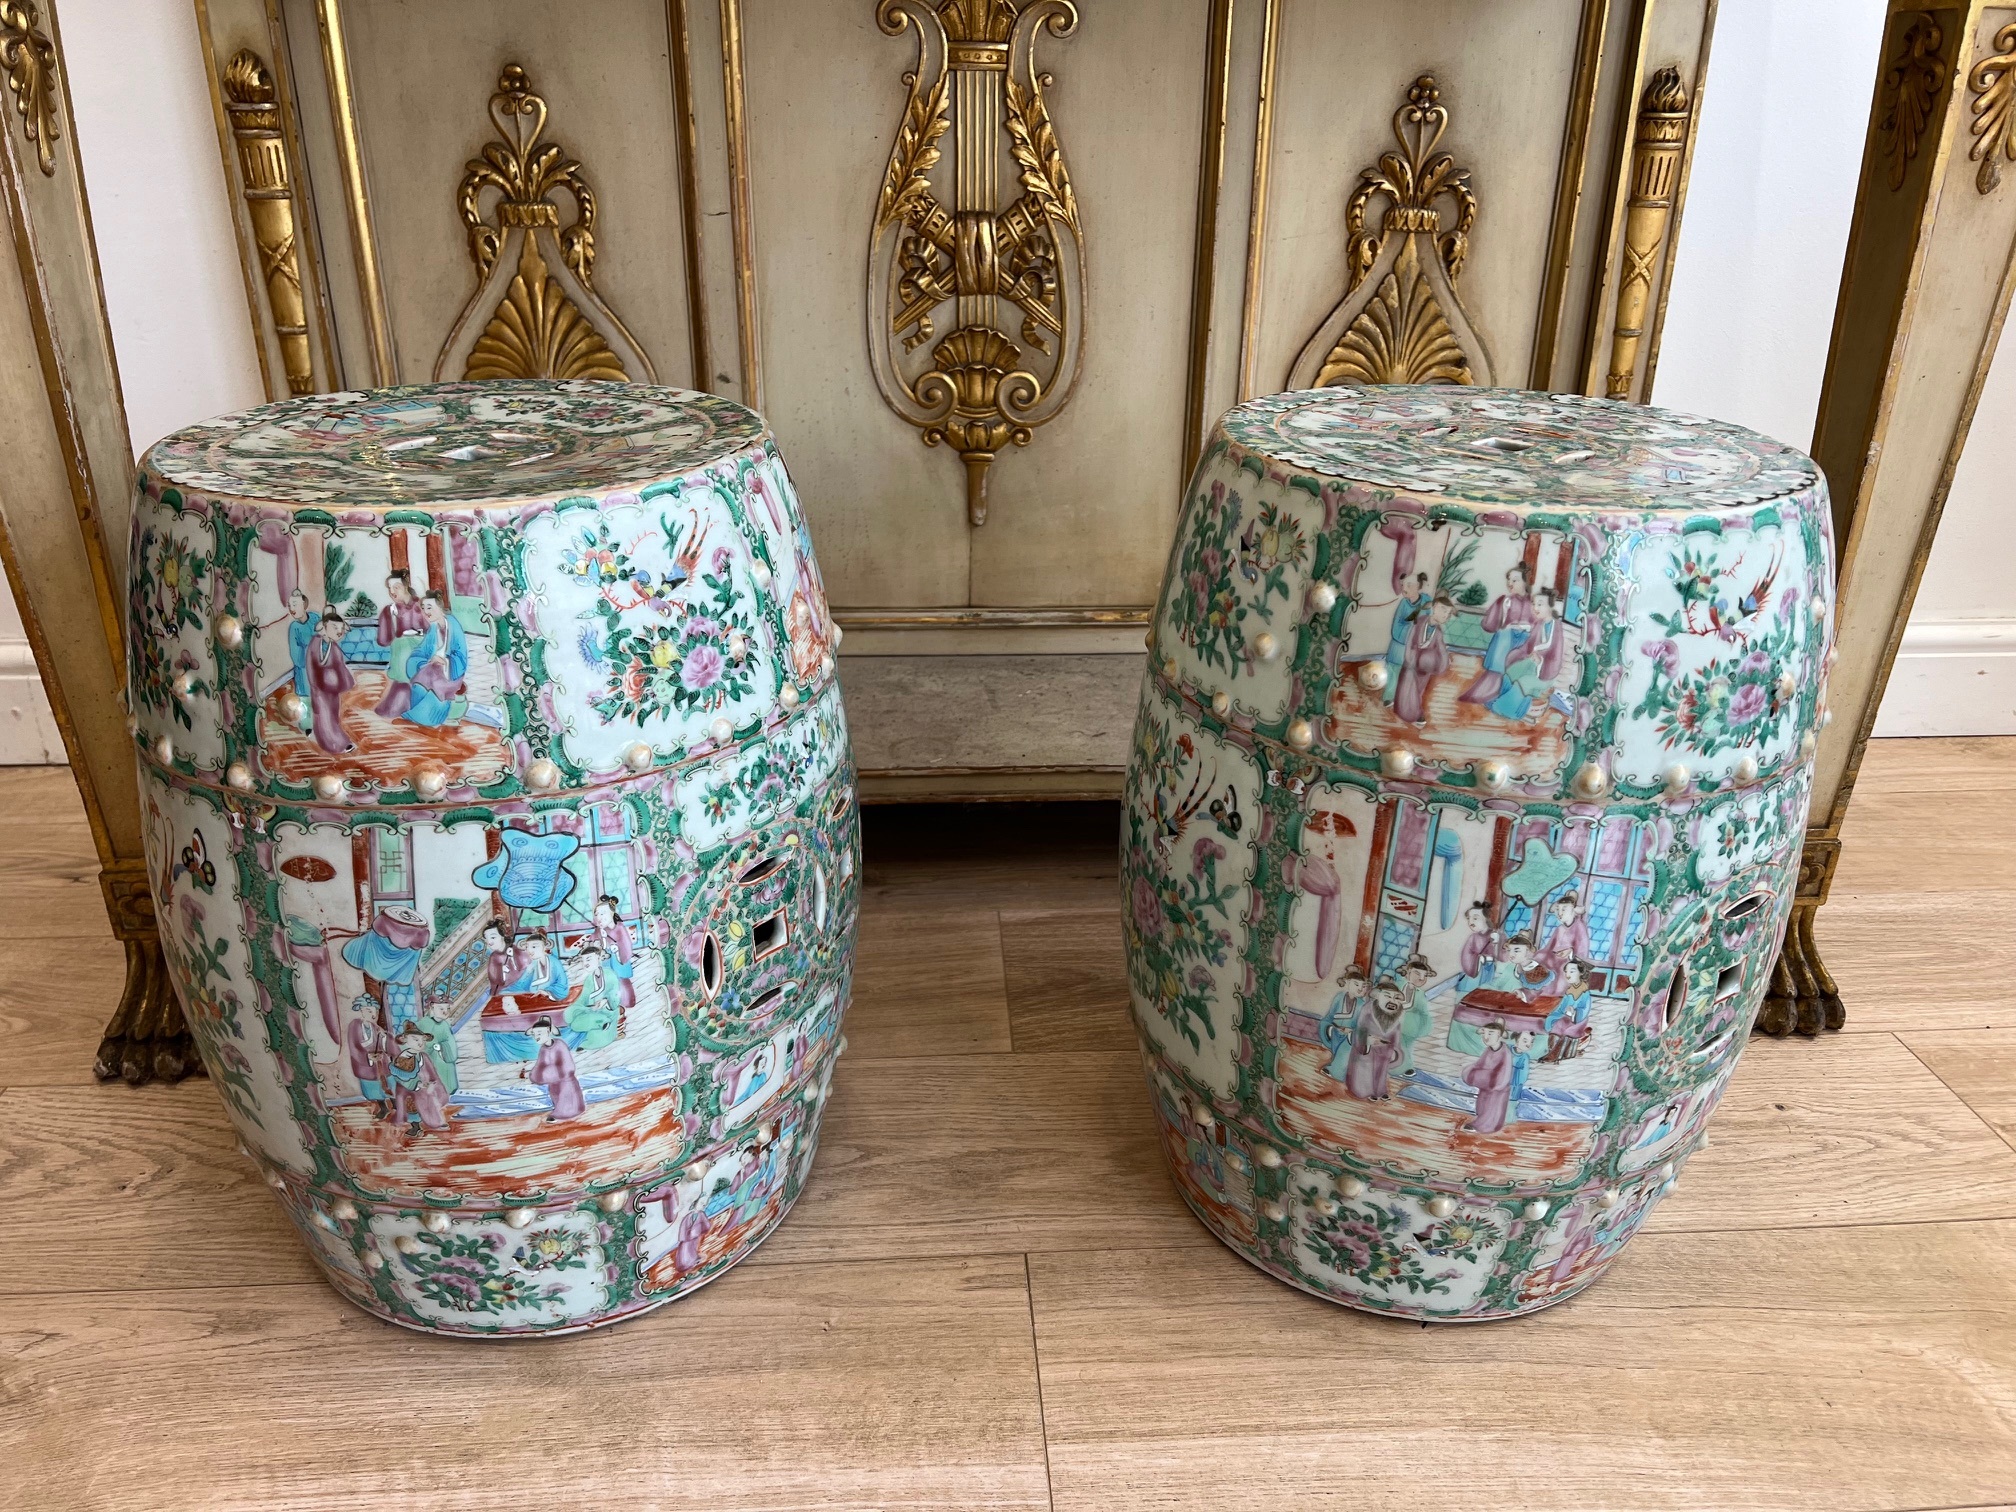 A PAIR OF 19TH CENTURY CHINESE FAMILLE ROSE PORCELAIN GARDEN SEATS - Image 7 of 12